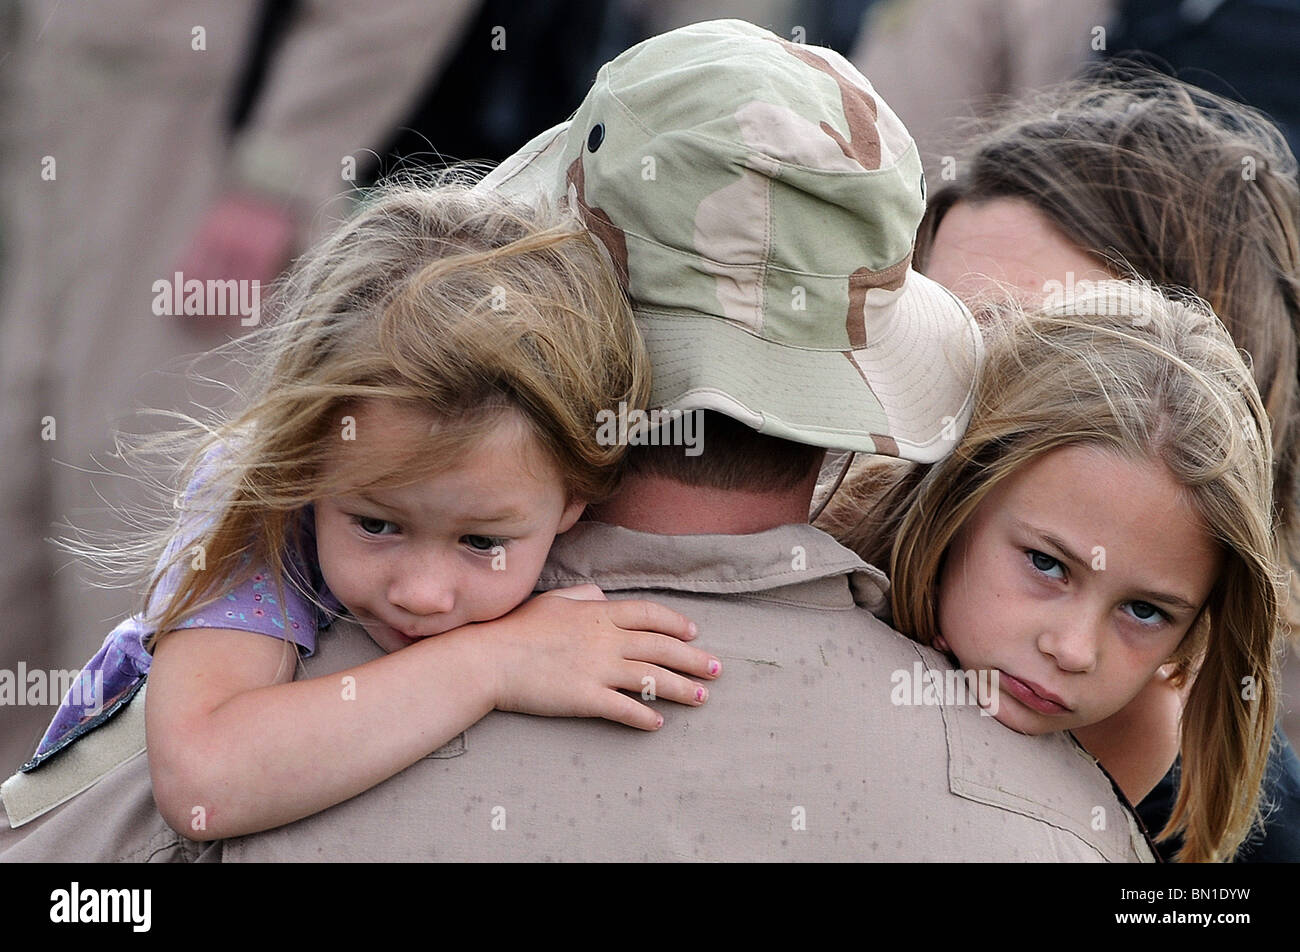 1st. Lt. William Jacks, 34th Bomb Squadron B-1 pilot, hugs his daughters Rachel (left) and Anna at Ellsworth Air Force Base Stock Photo